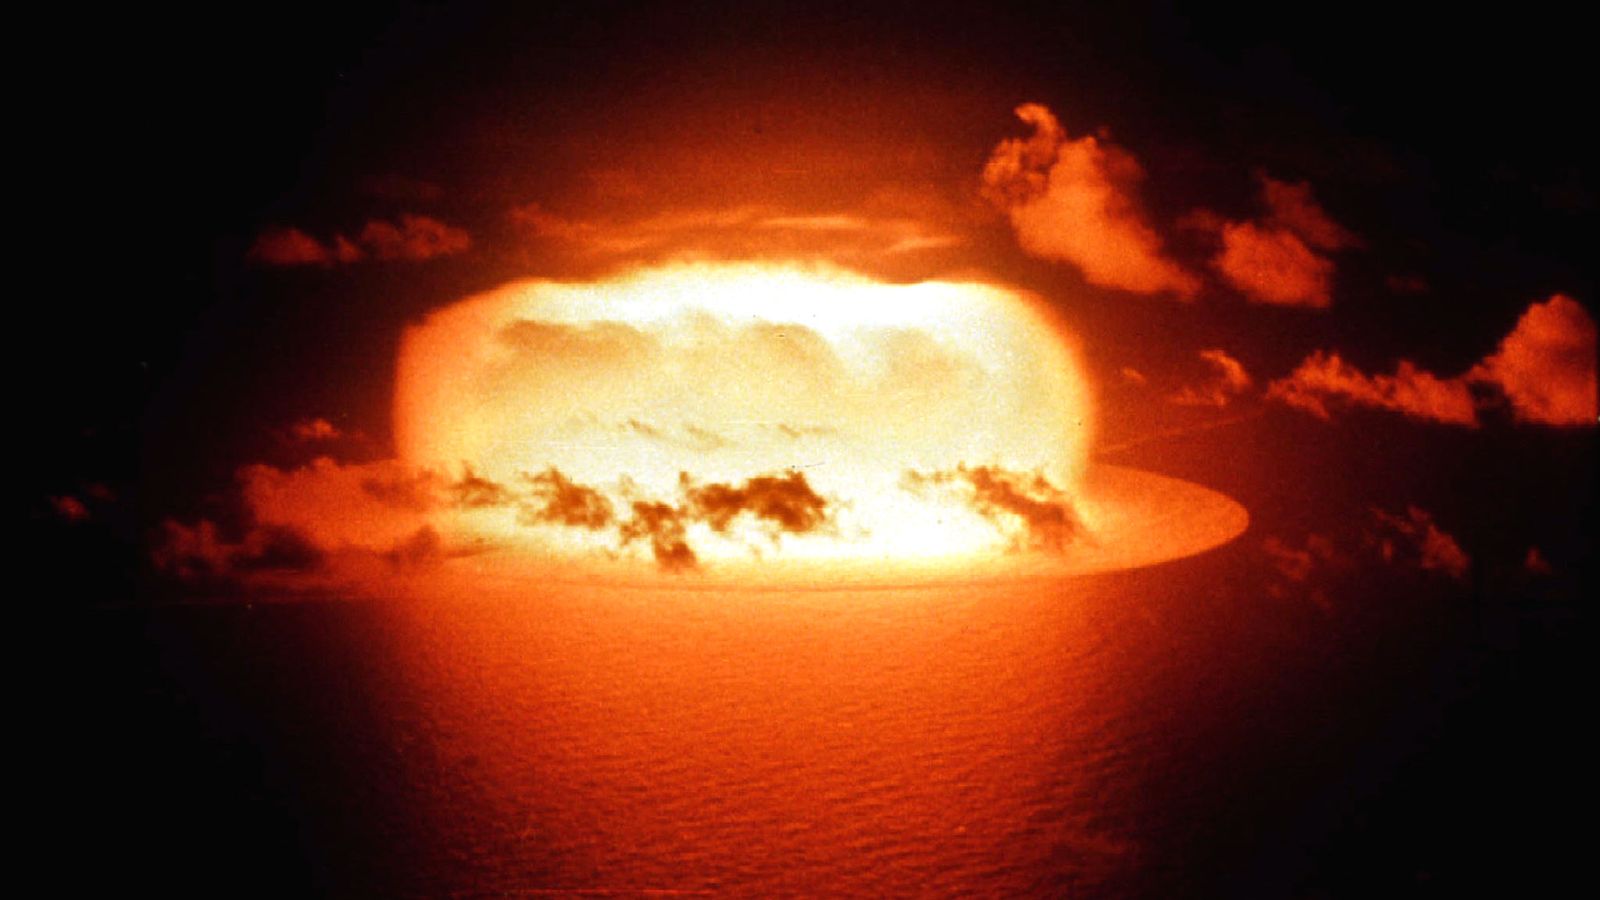 'It seems unthinkable that we may be facing a nuclear apocalypse'